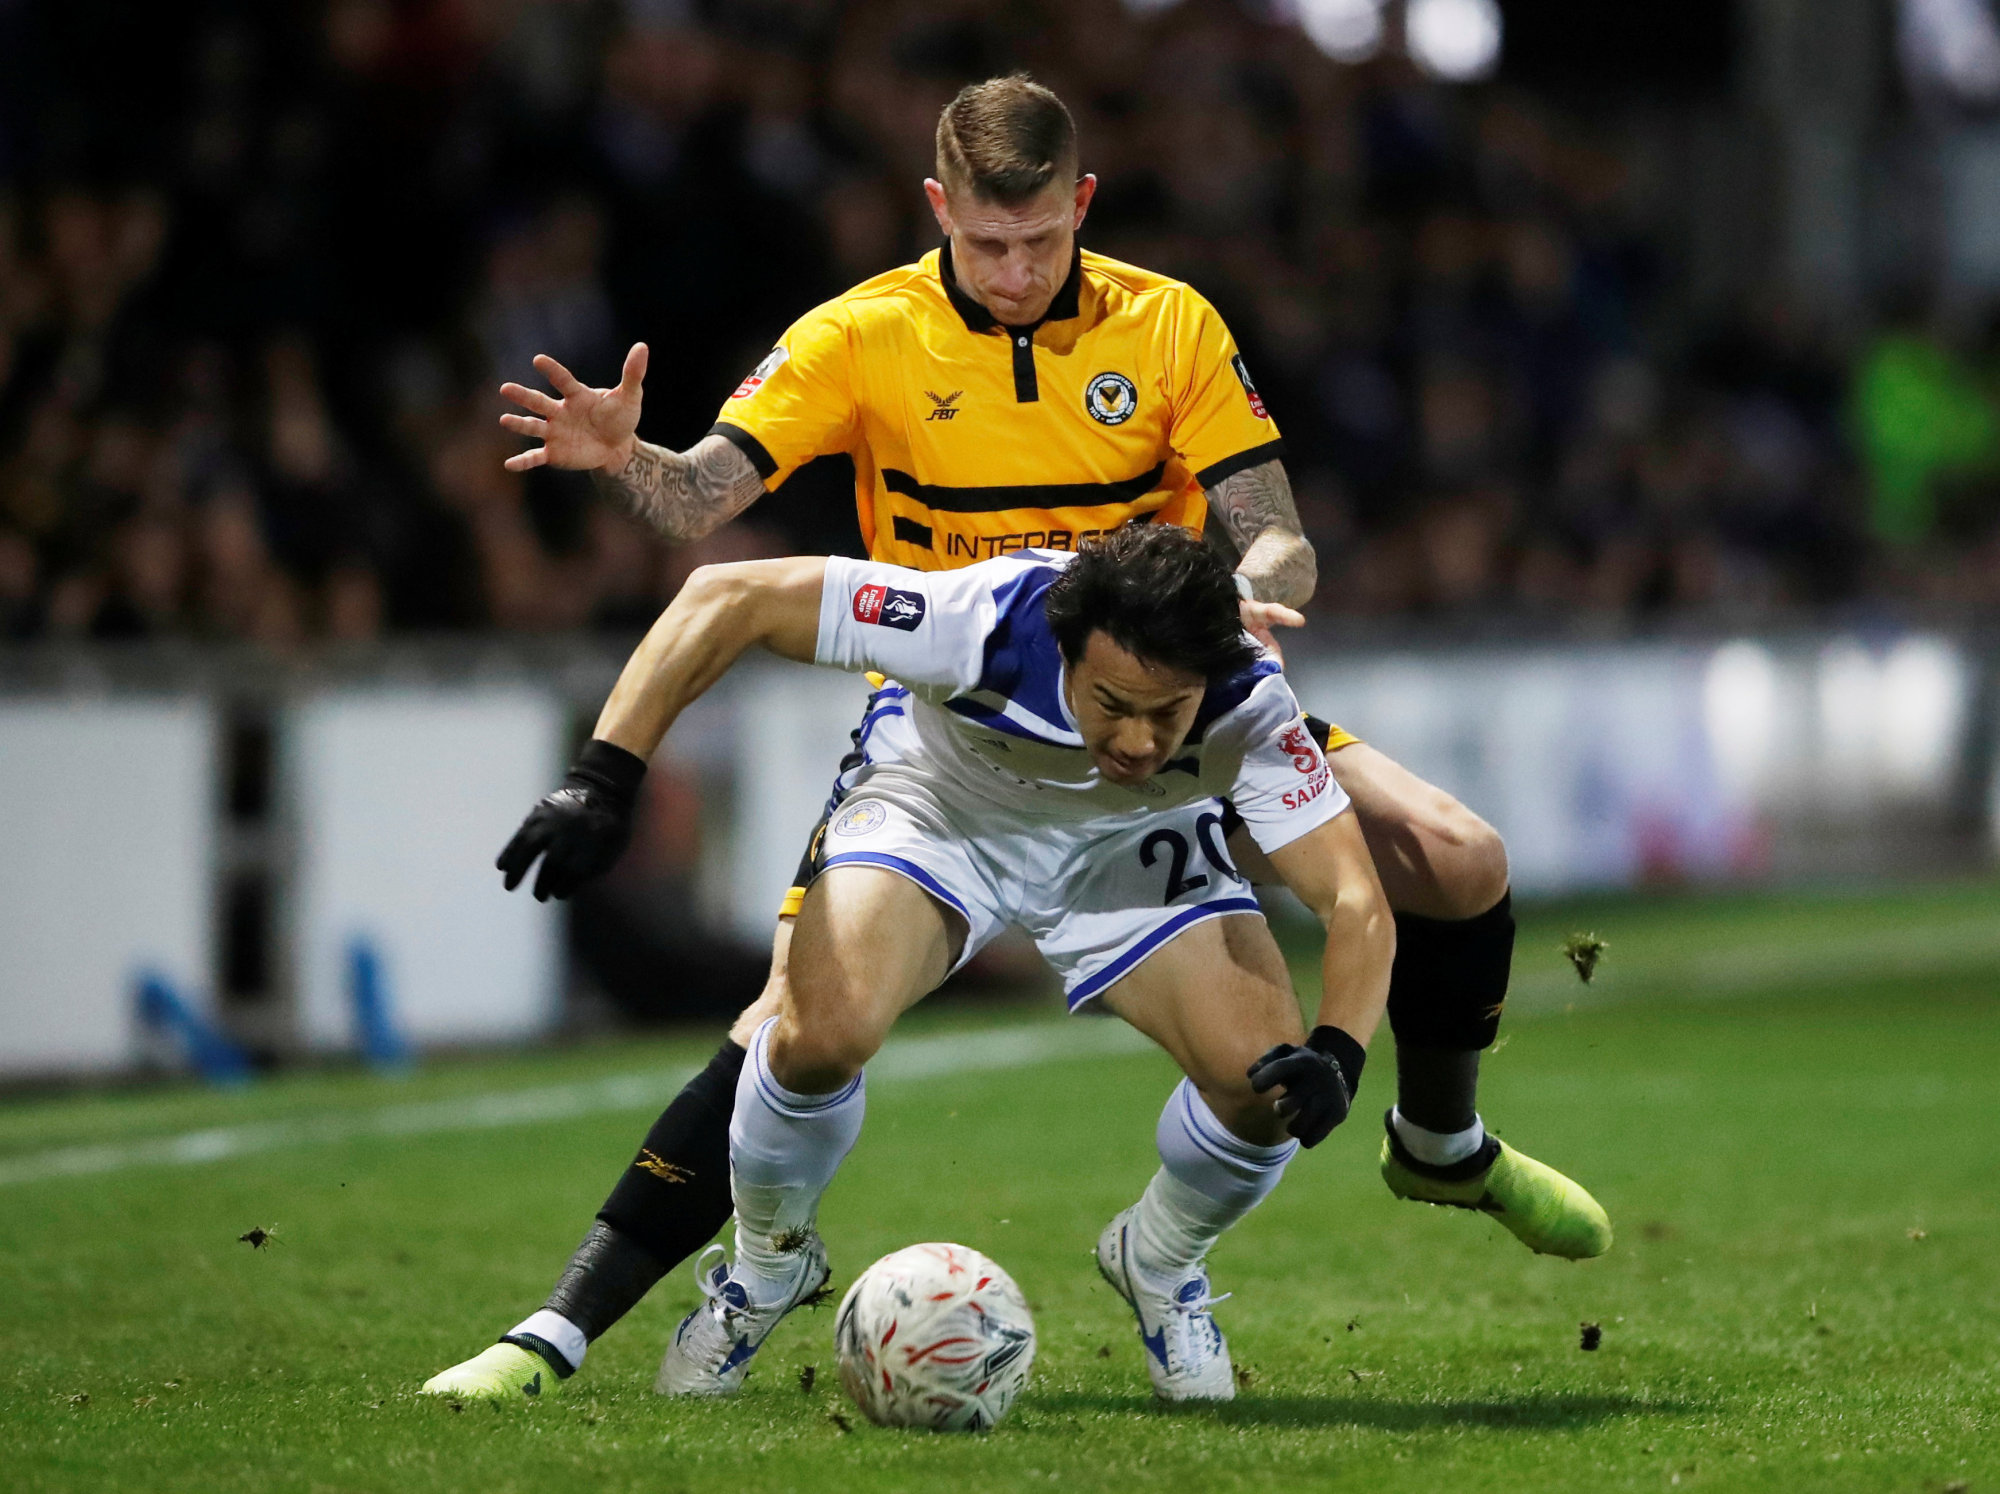 Leicester's Shinji Okazaki (front) fights with with Newport County's Scott Bennett for the ball on Jan. 6 in Rodney Parade, England. The Samurai Blue veteran has expressed his willingness to change clubs in the current transfer window if it improves his chances of participating in the next World Cup. | REUTERS